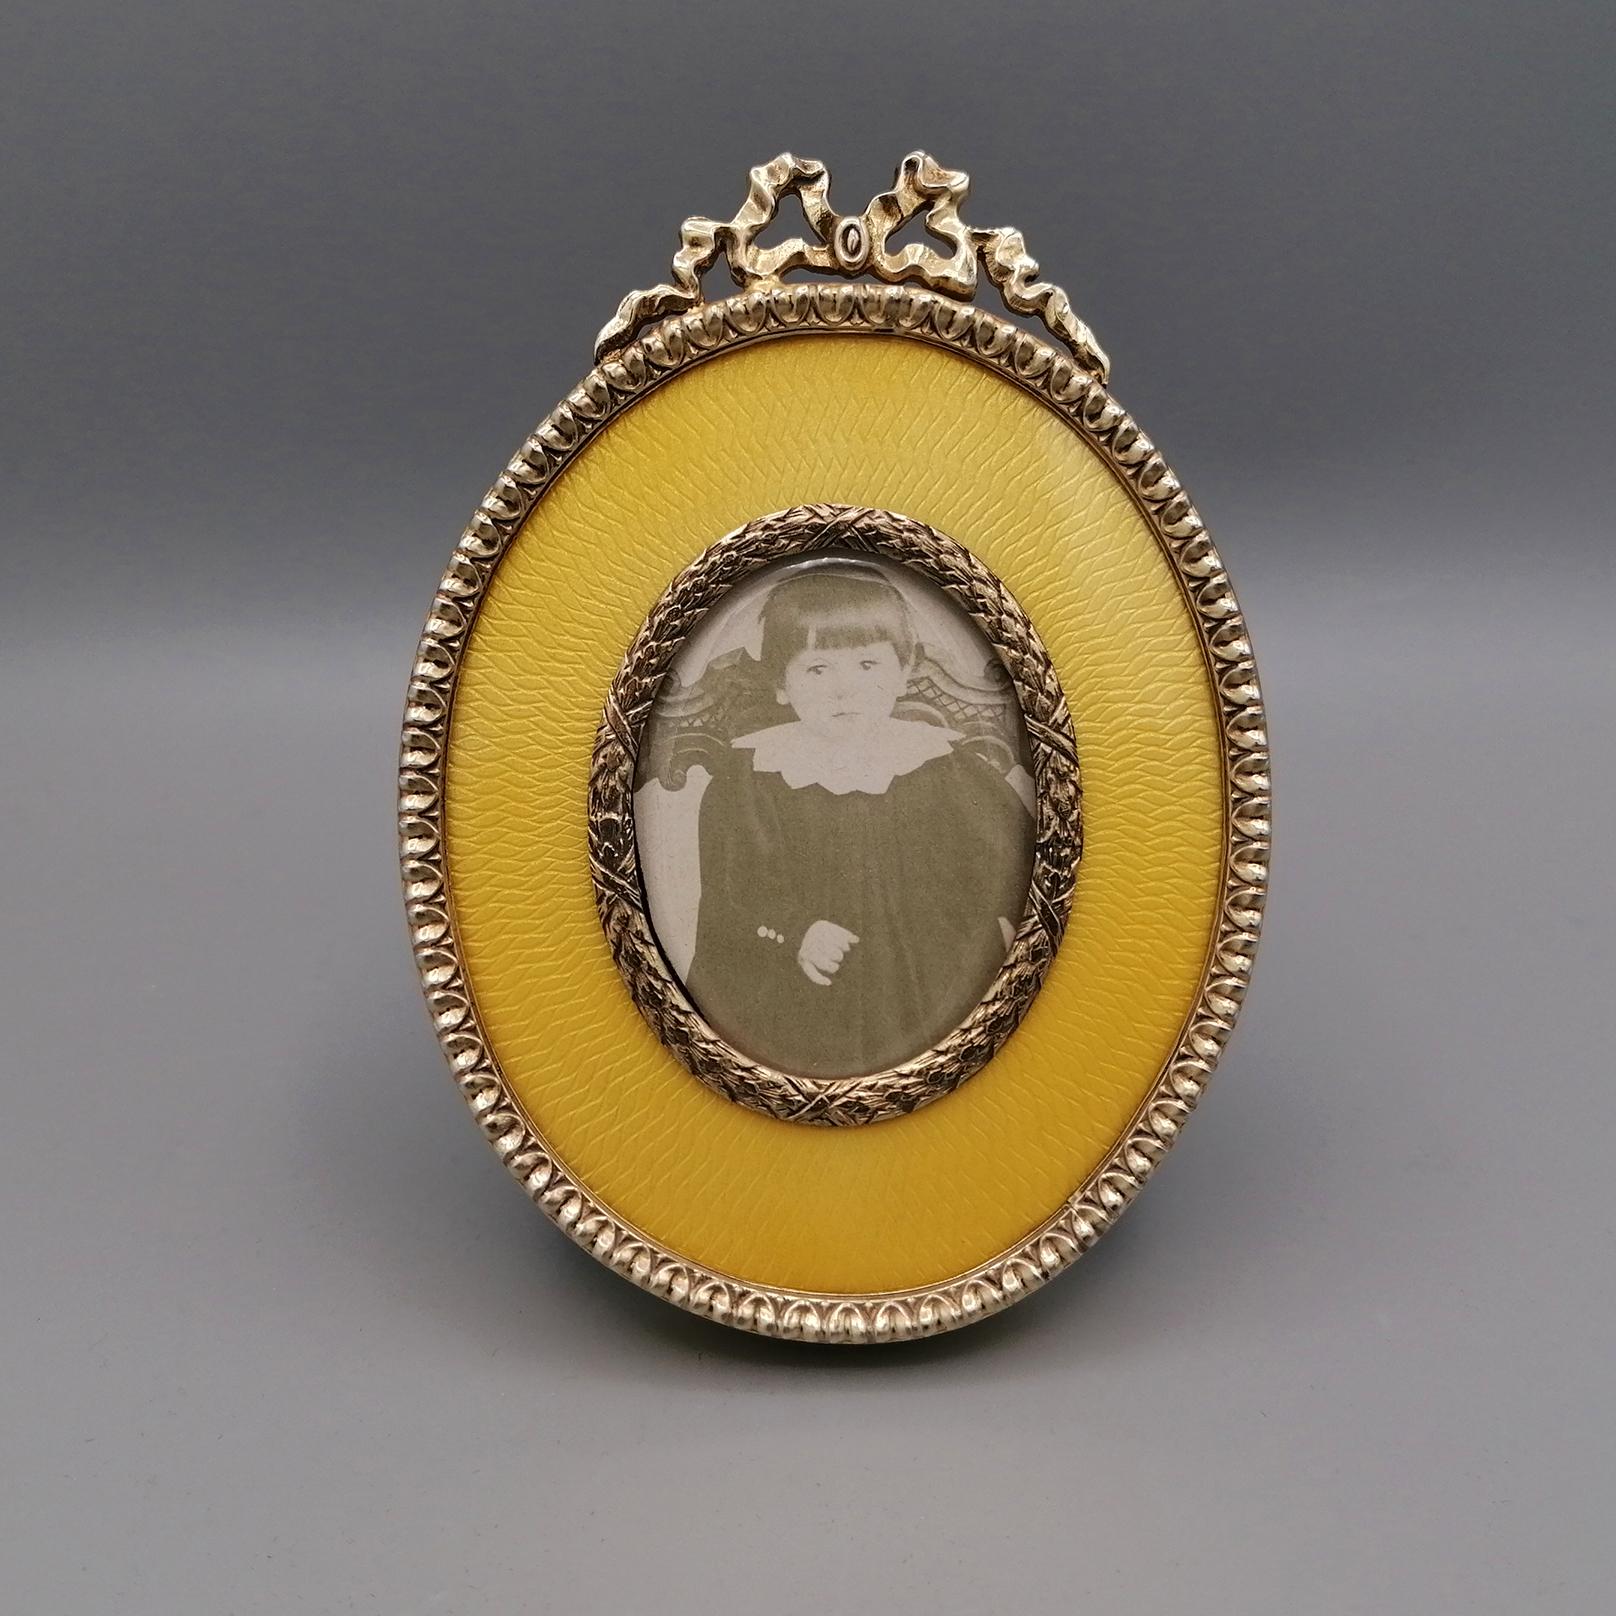 Oval Fabergè style frame in gilded 925/1000 silver with translucent yellow fired enamel on guilloché and ribbon on the upper part.
12x8,5 cm
photo 5,5x4 cm
The Miniatures are hand-painted on a usually white homogeneous enamel base. The same